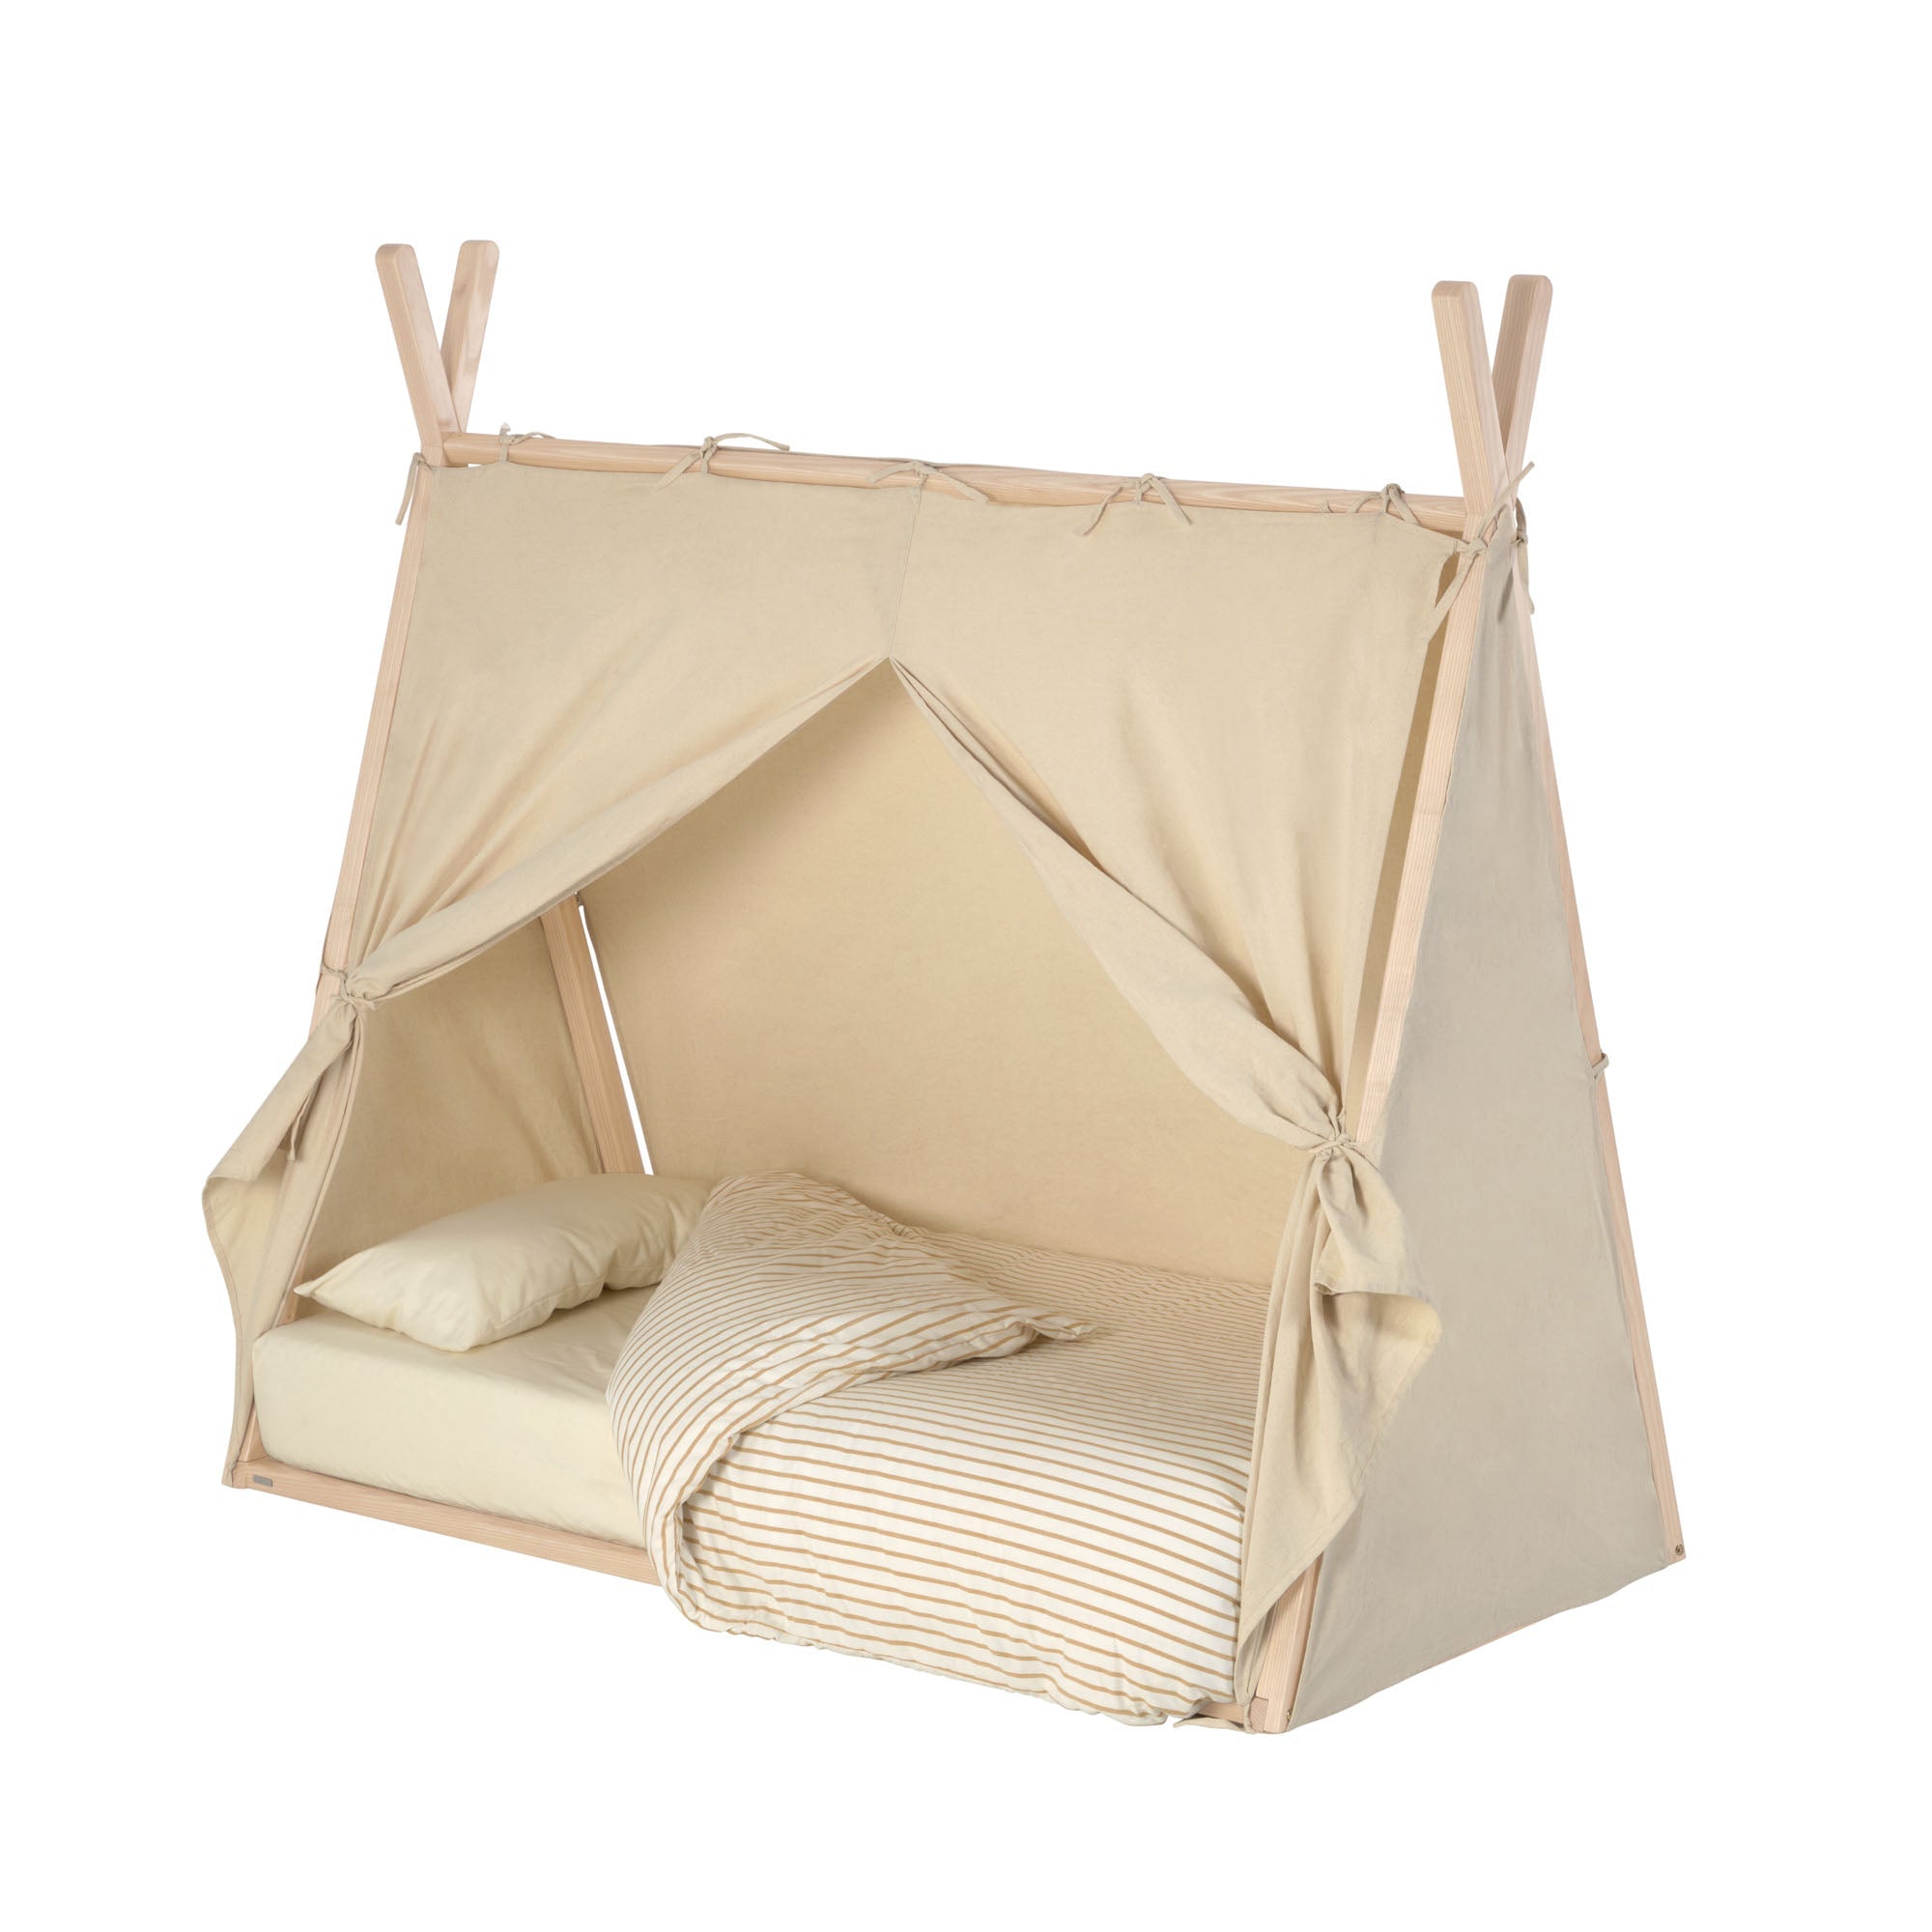 100% cotton canopy for Maralis tipi bed 70 x 140 cm